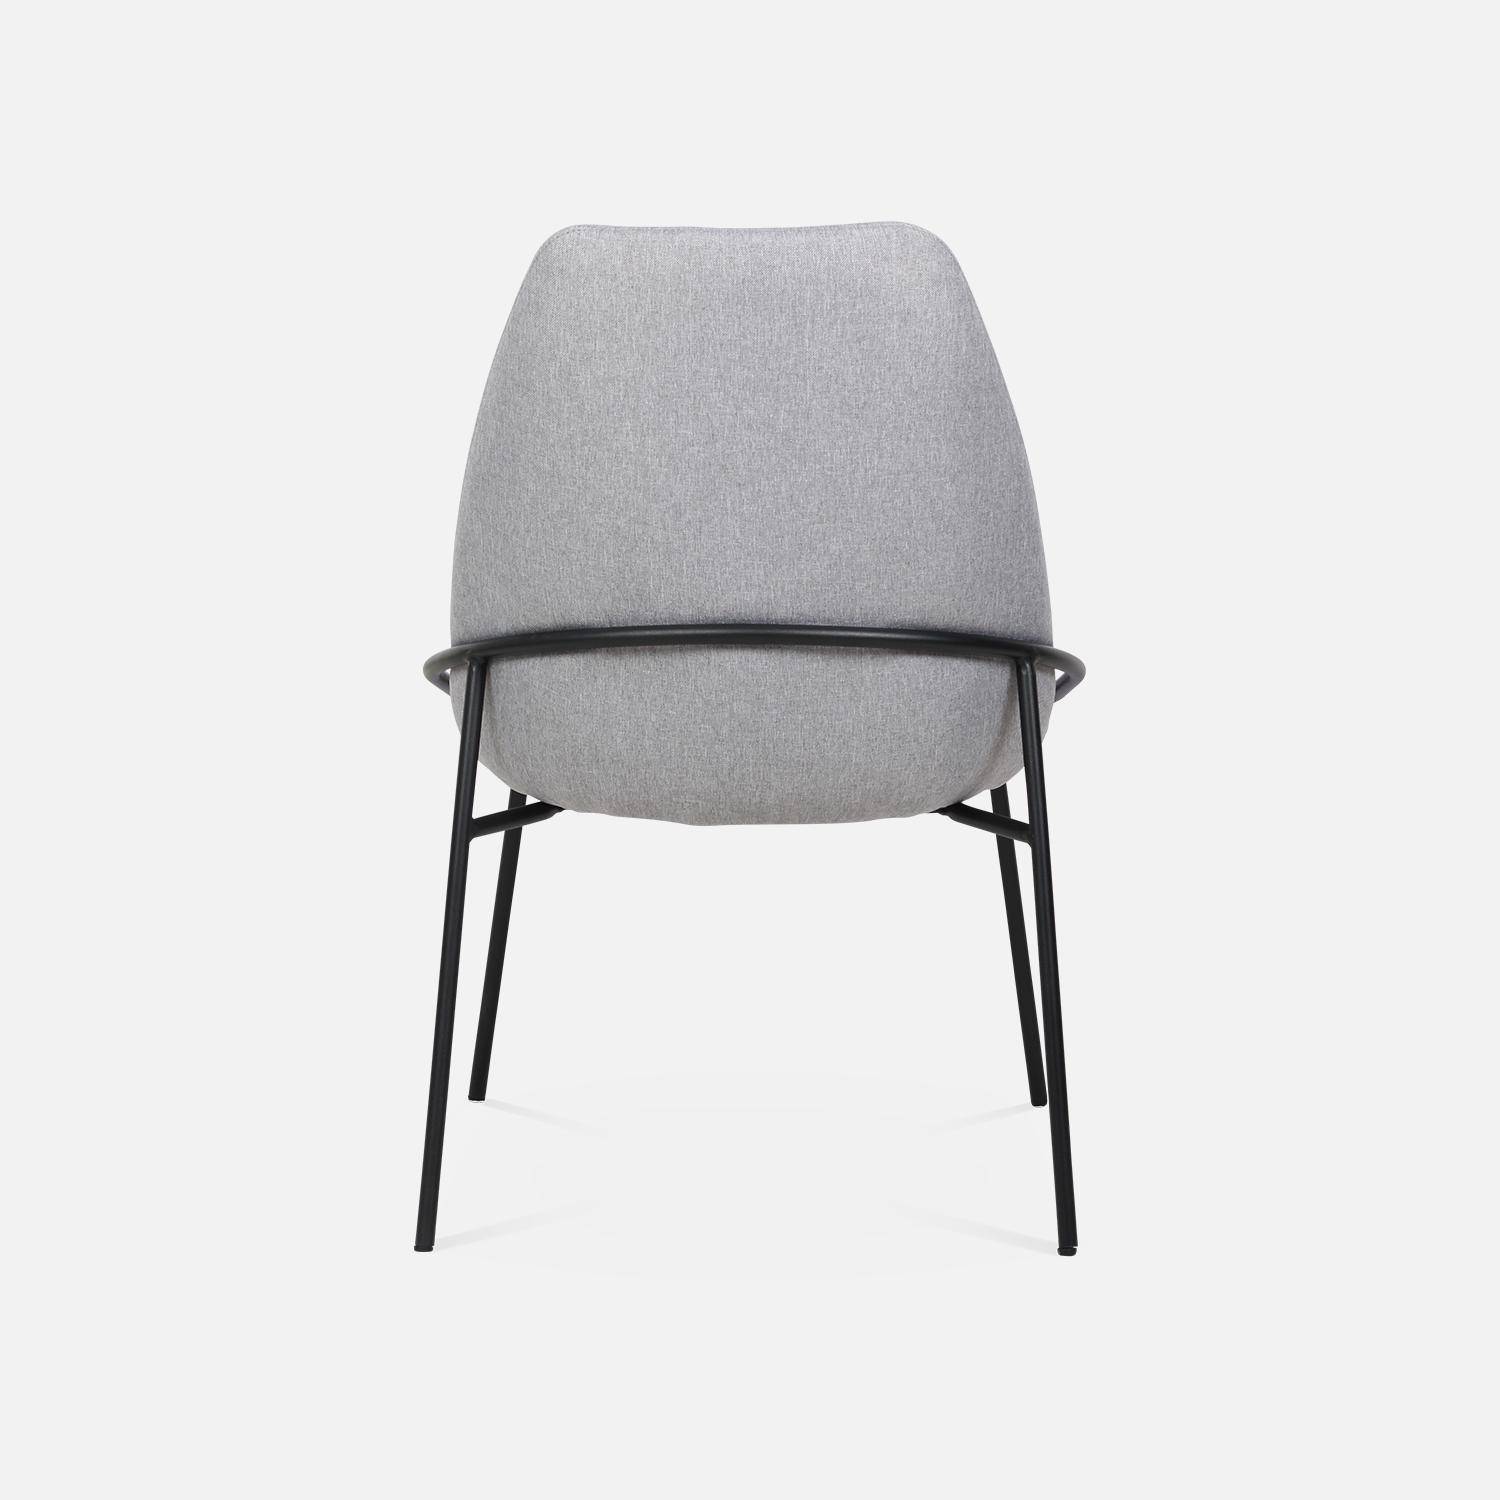 Retro-style metal and upholstered chair, 56.5x63x82.5cm, Lisbet, Light Grey,sweeek,Photo6